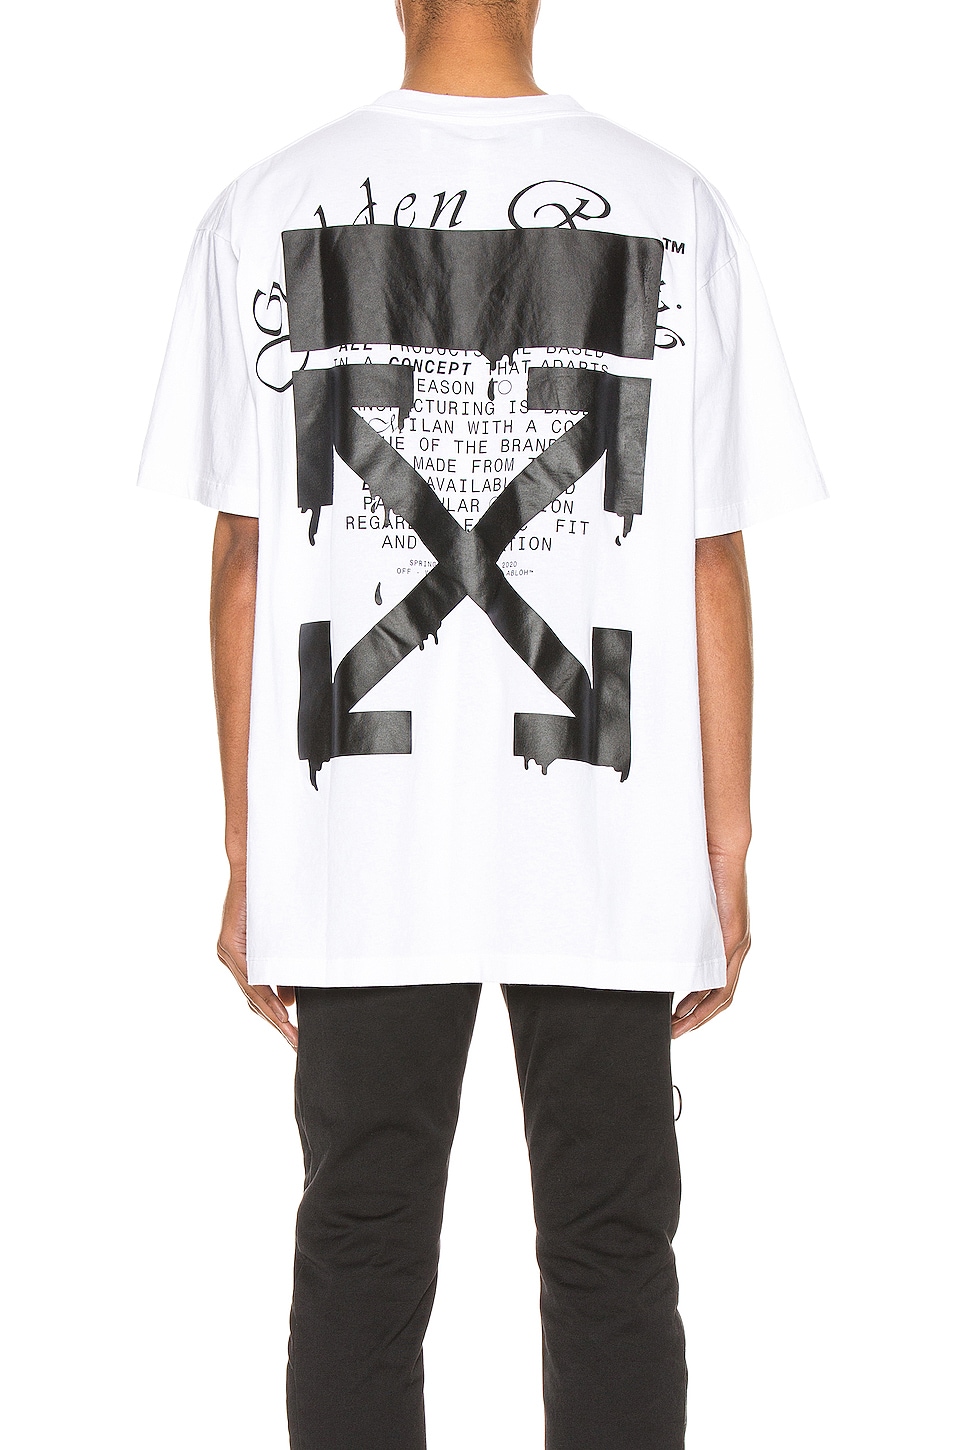 OFF-WHITE Dripping Arrows Tee in White & Black | REVOLVE